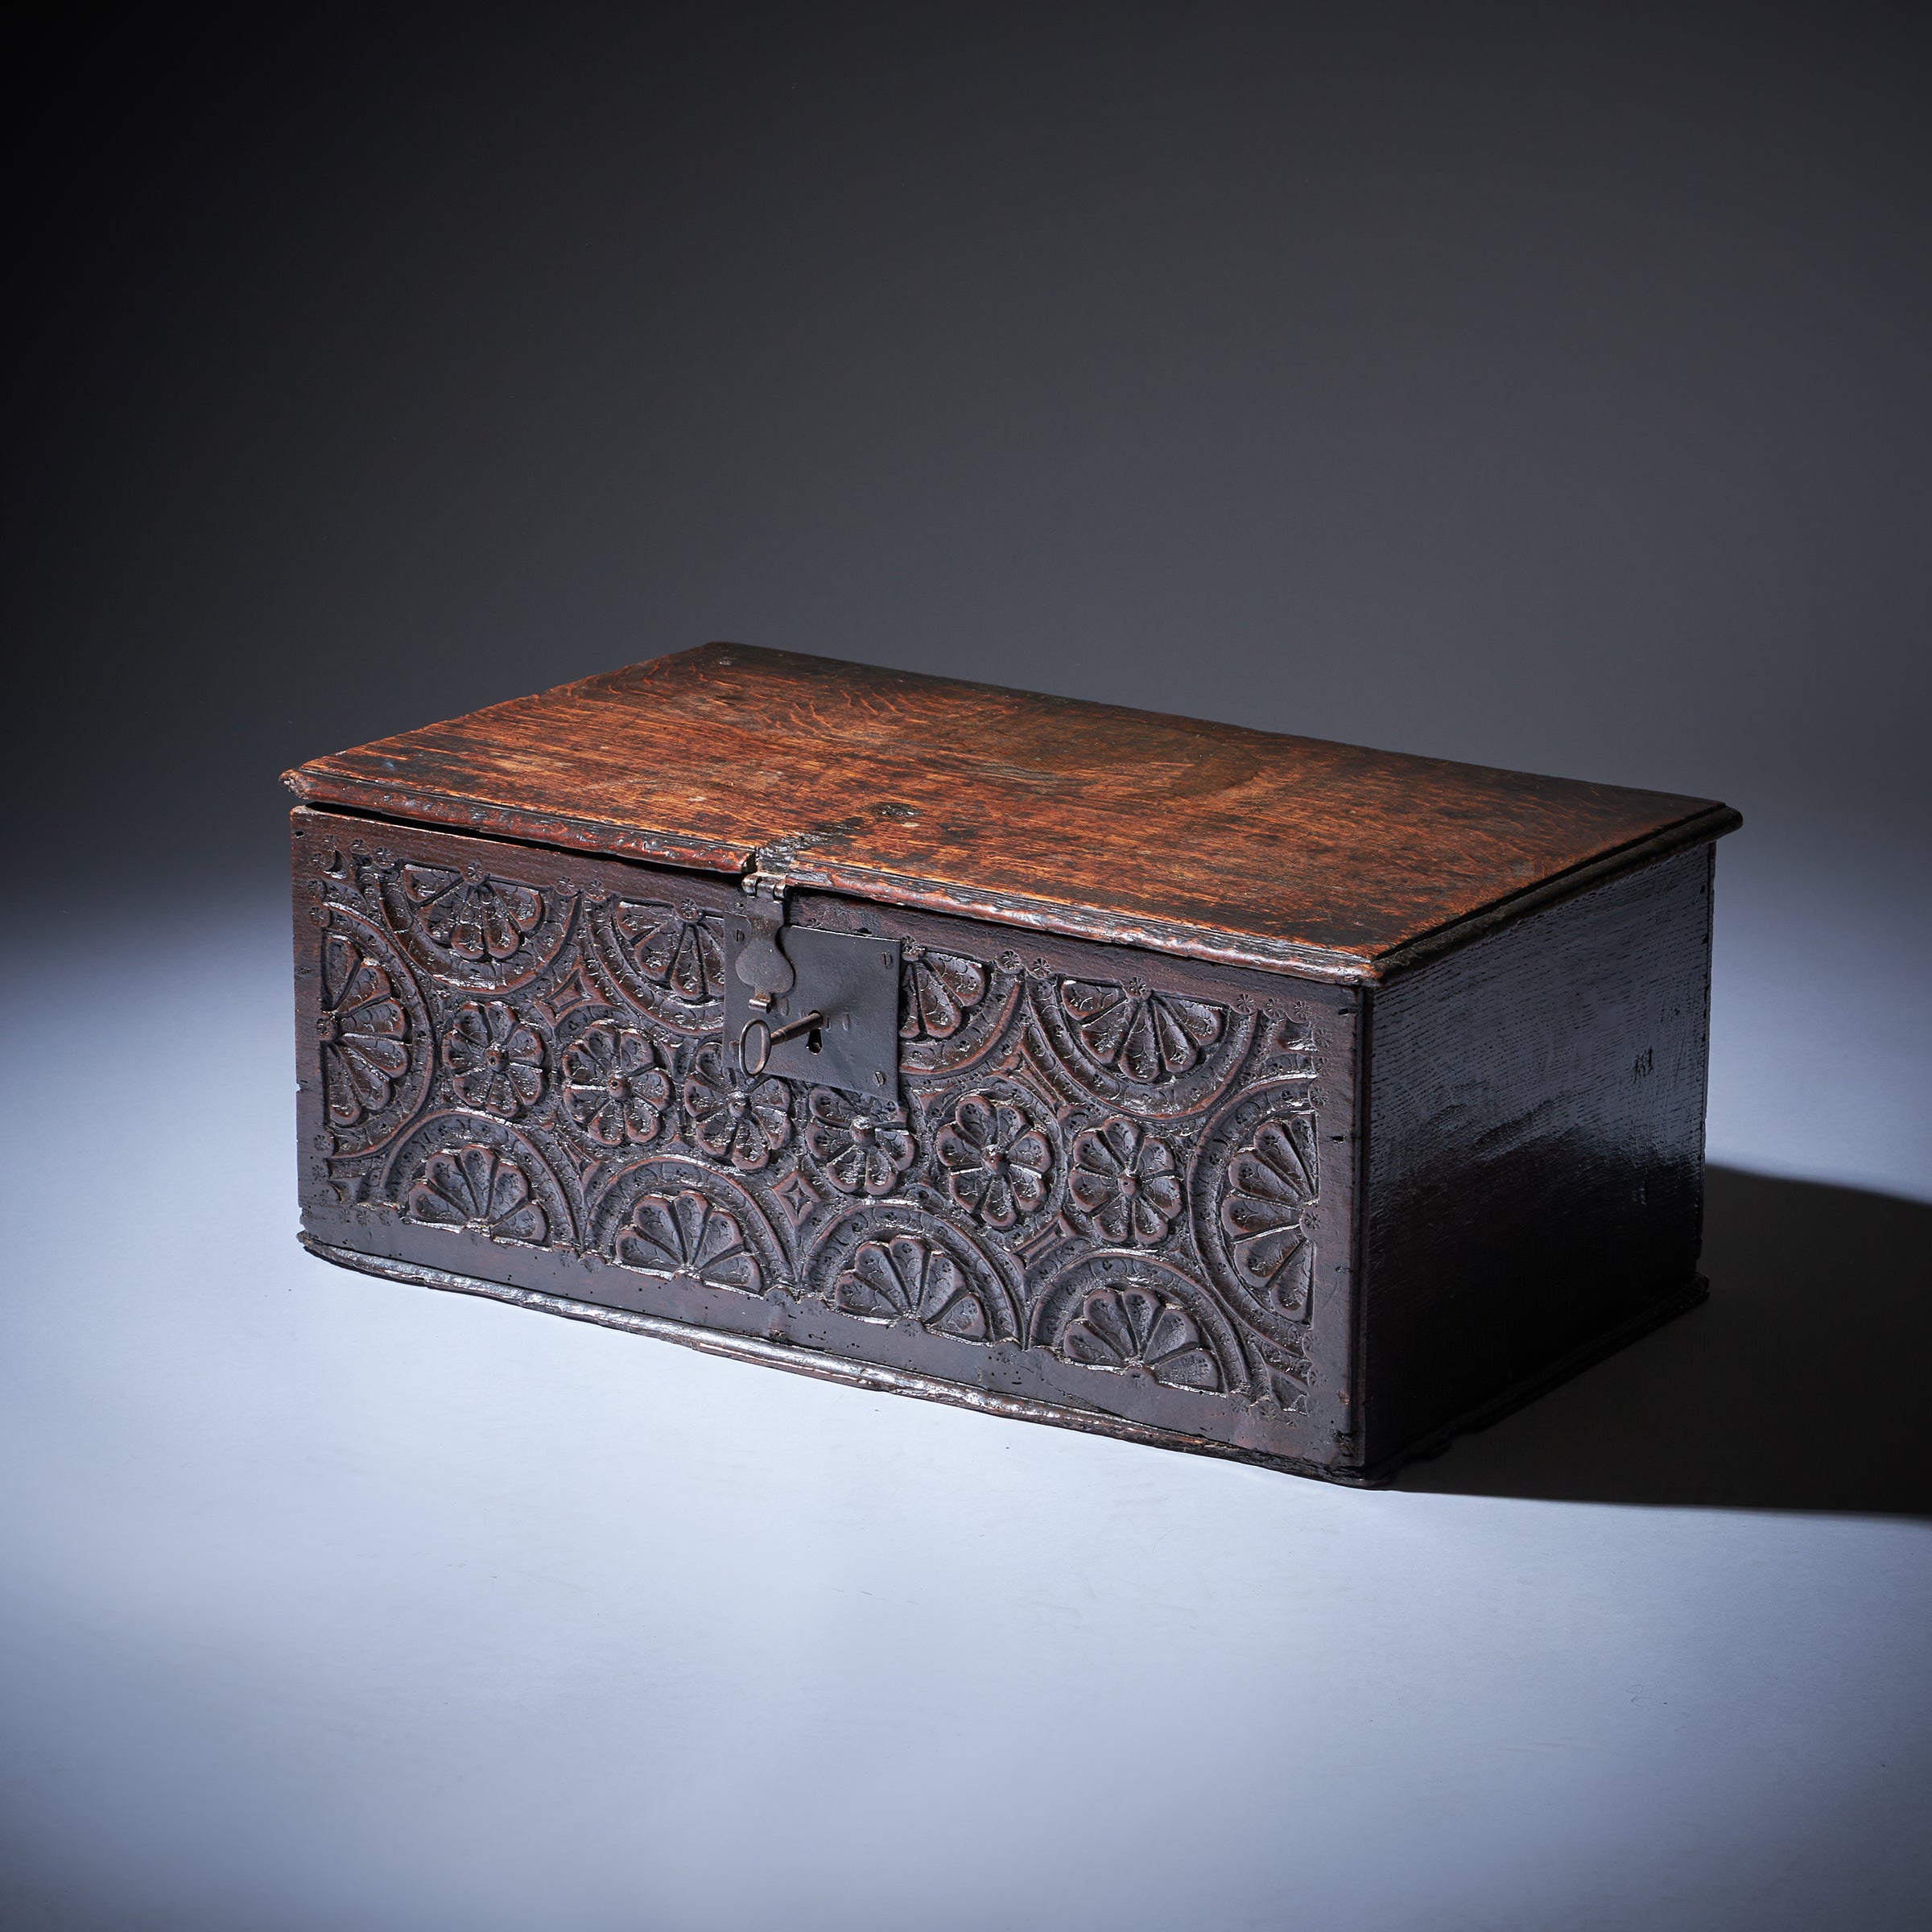 An attractive early 17th-century carved oak box of boarded construction from the reign of Charles I, circa 1640. England

The box is deeply carved and punch decorated to the frieze in a geometric pattern with rose (guilloche) and lunar decoration,